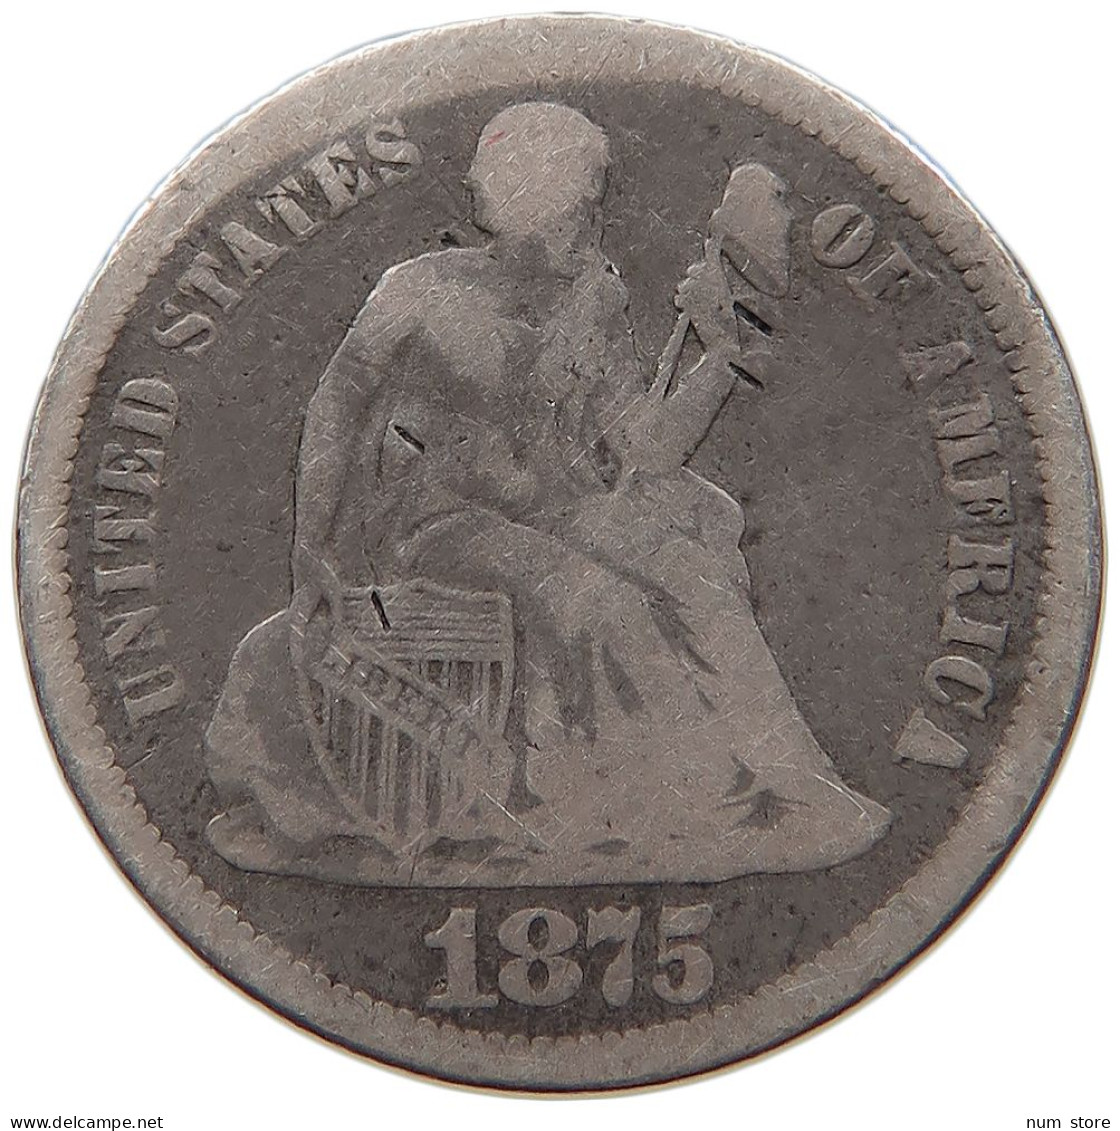 UNITED STATES OF AMERICA DIME 1875 CC SEATED LIBERTY #t143 0391 - 1837-1891: Seated Liberty